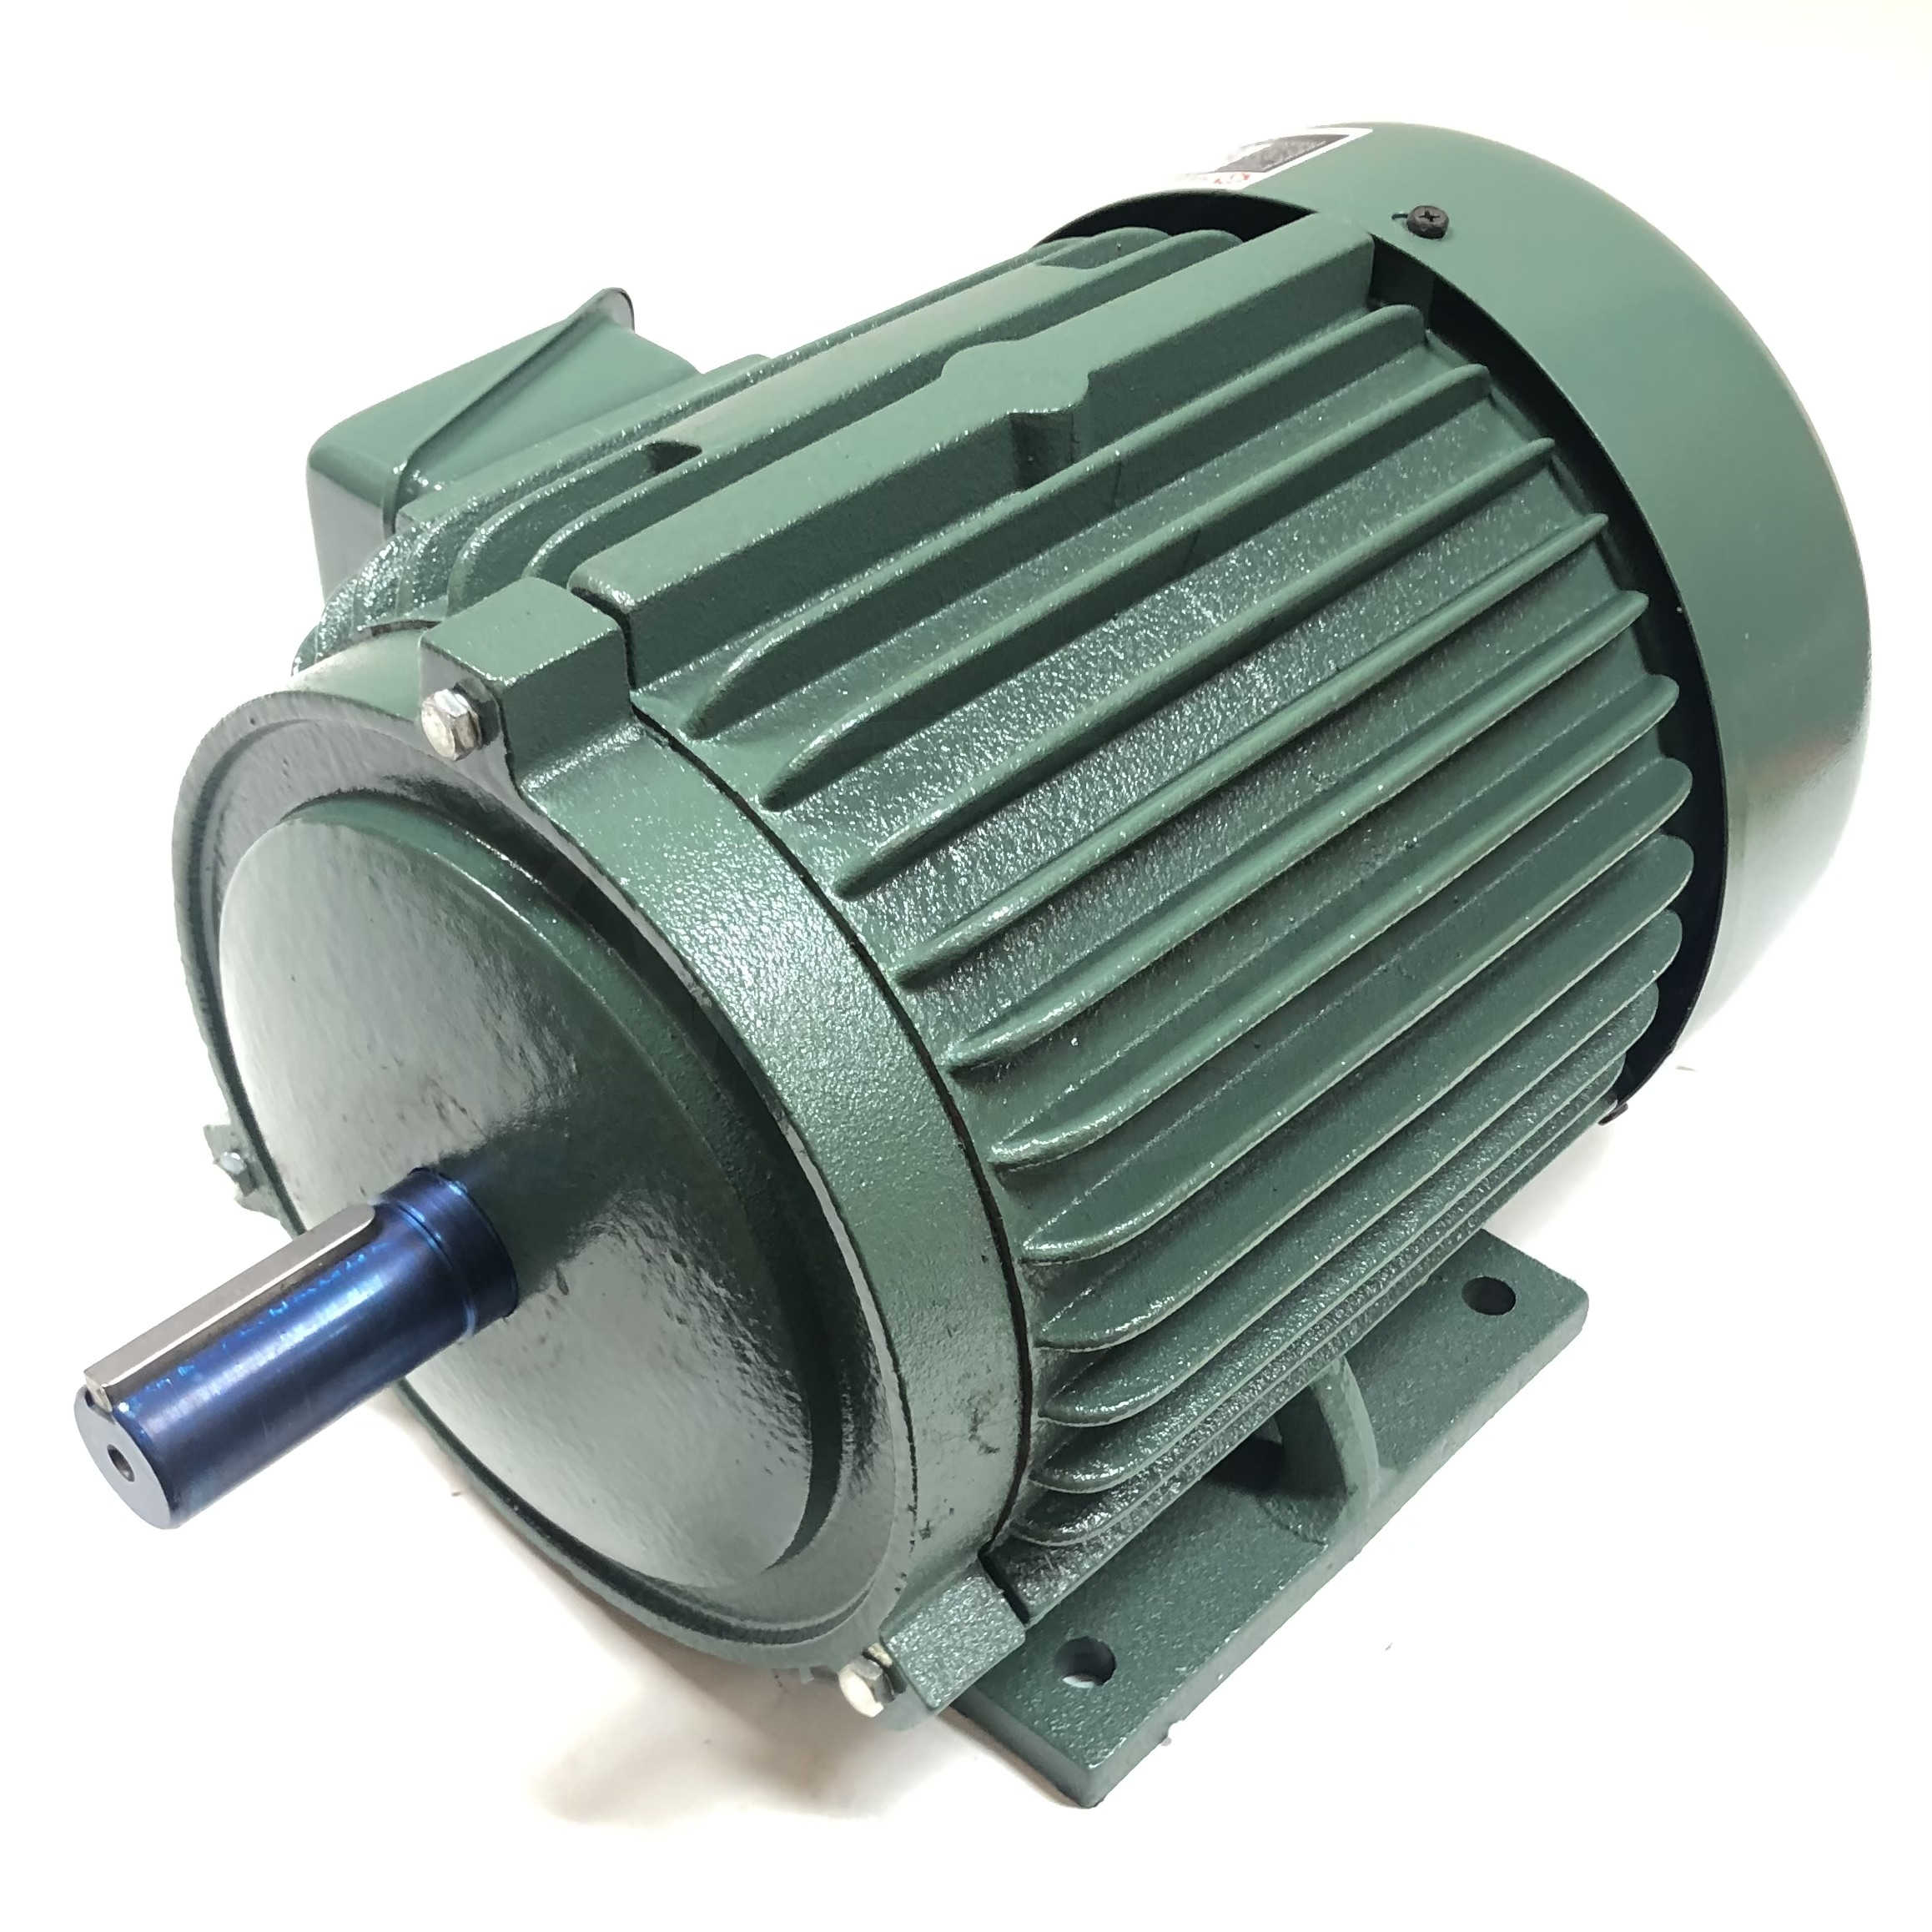 BW005A Youba Induction Motor 5Hp, 60Hz, 220-440V, 15/7.5A, 3450RPM, 3Phase 2